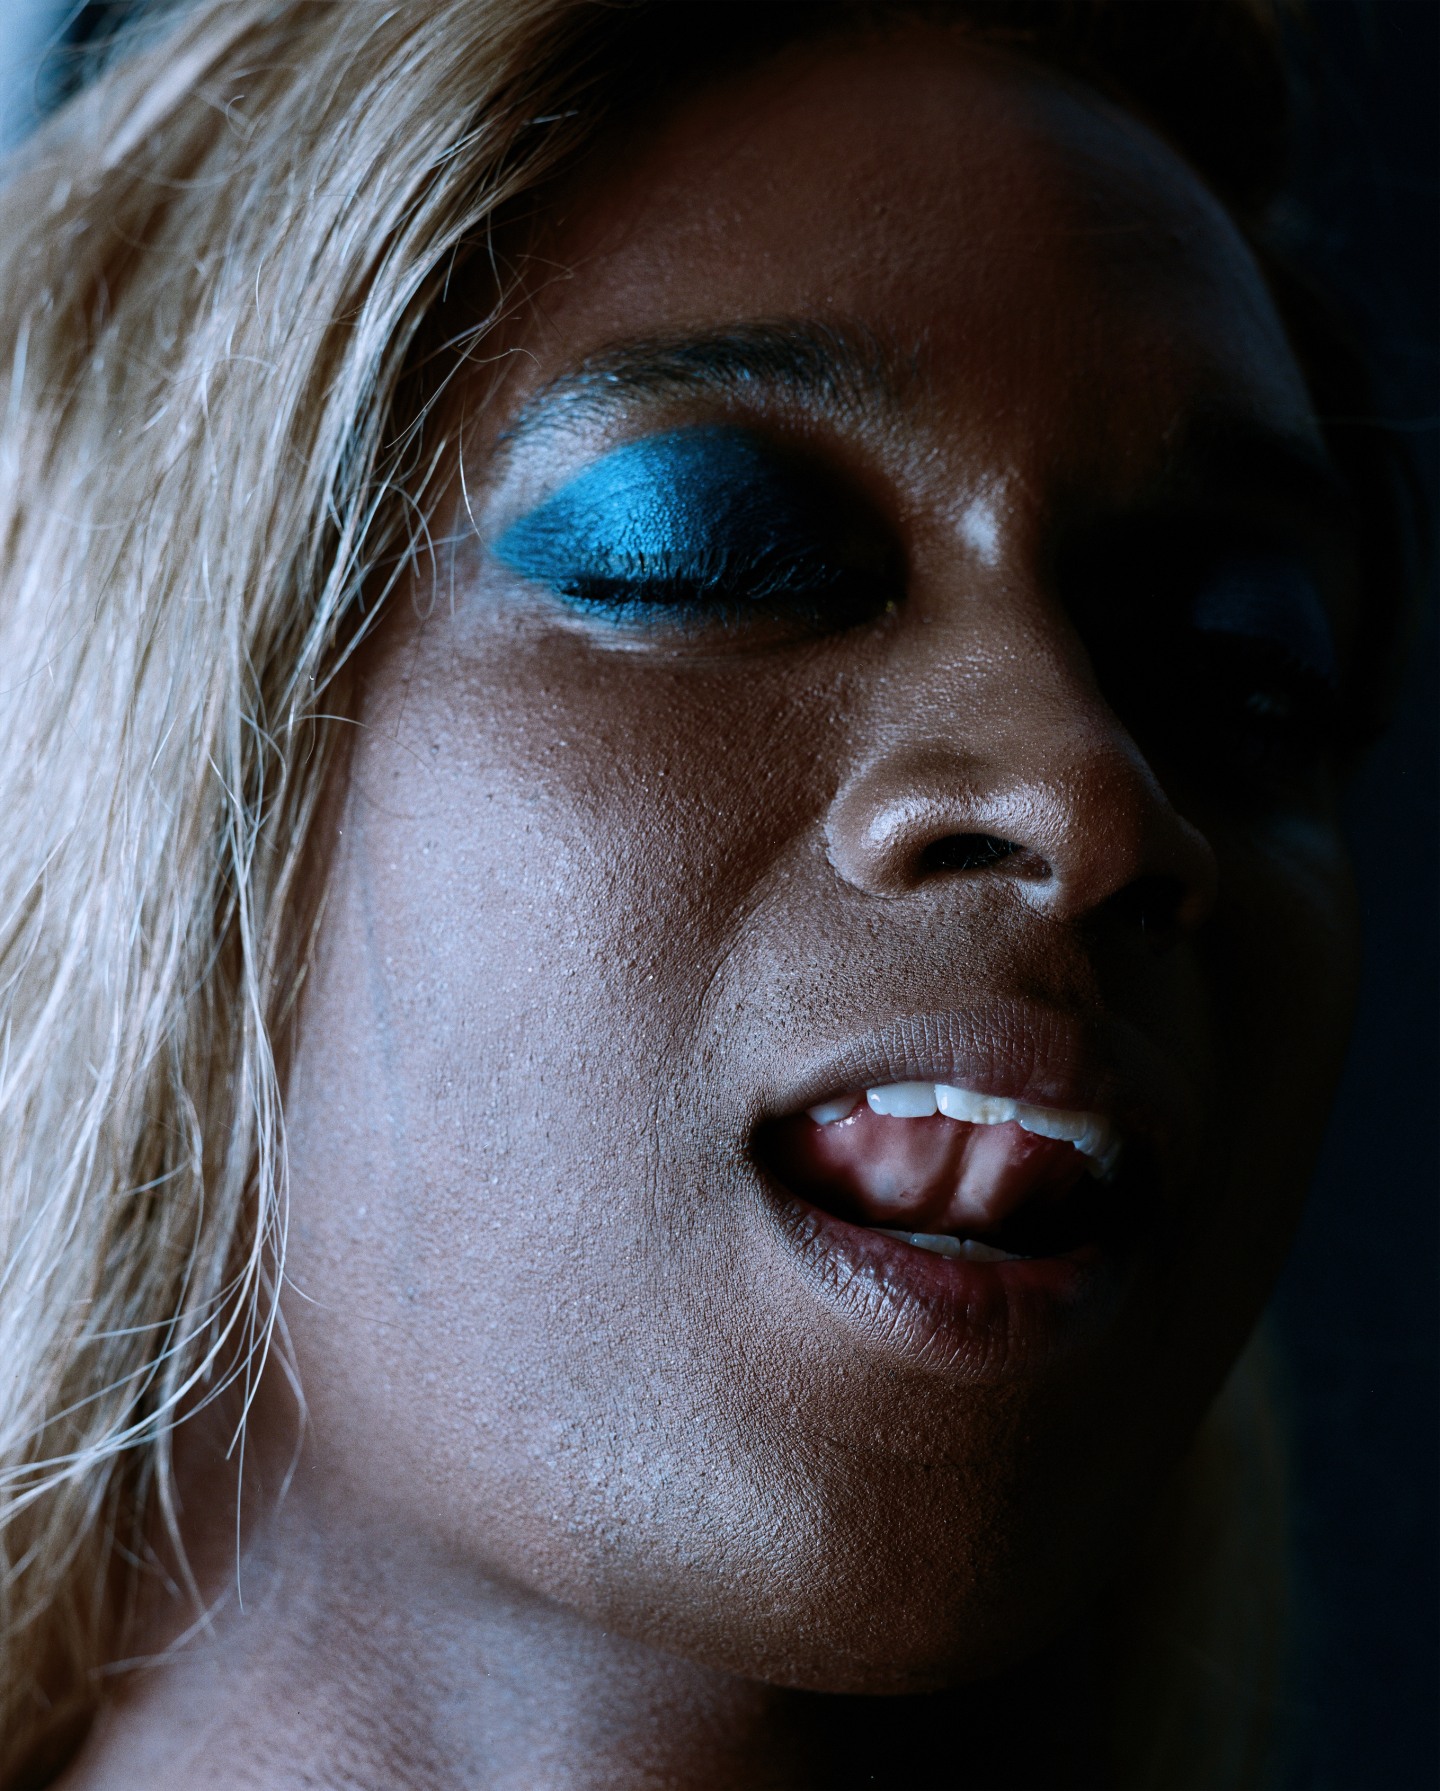 Lotic is using their voice